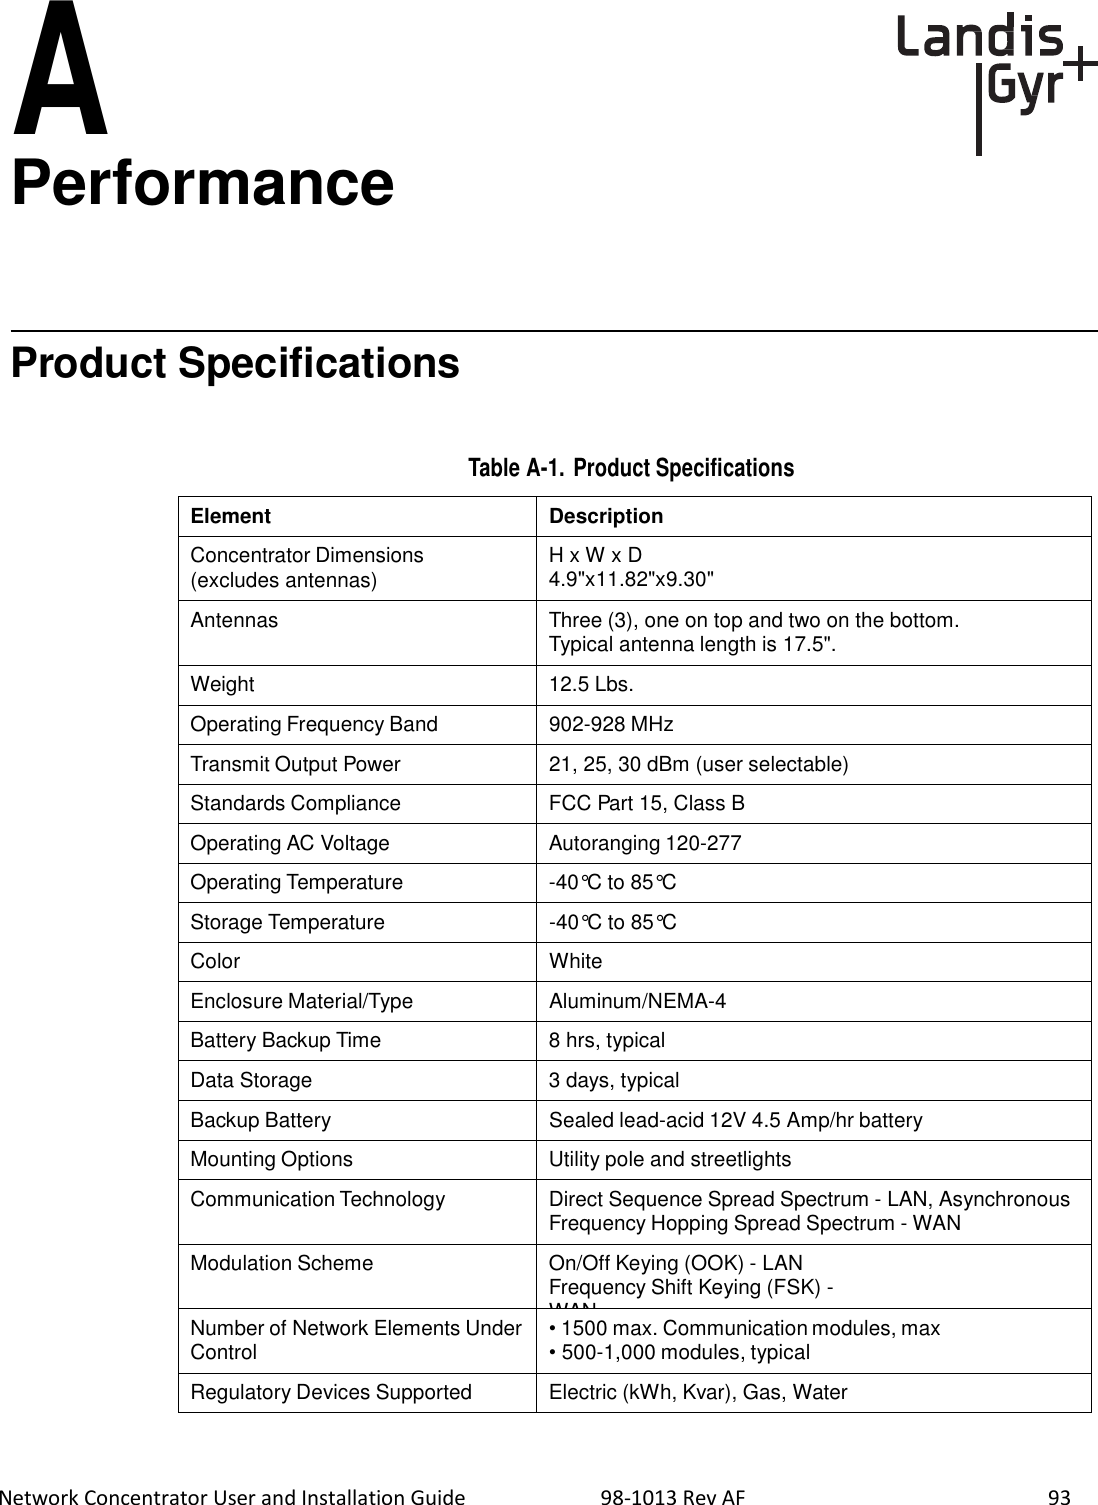   Network Concentrator User and Installation Guide                          98-1013 Rev AF    93 A Performance       Product Specifications    Table A-1. Product Specifications  Element Description Concentrator Dimensions (excludes antennas) H x W x D 4.9&quot;x11.82&quot;x9.30&quot; Antennas Three (3), one on top and two on the bottom. Typical antenna length is 17.5&quot;. Weight 12.5 Lbs. Operating Frequency Band 902-928 MHz Transmit Output Power 21, 25, 30 dBm (user selectable) Standards Compliance FCC Part 15, Class B Operating AC Voltage Autoranging 120-277 Operating Temperature -40°C to 85°C Storage Temperature -40°C to 85°C Color White Enclosure Material/Type Aluminum/NEMA-4 Battery Backup Time 8 hrs, typical Data Storage 3 days, typical Backup Battery Sealed lead-acid 12V 4.5 Amp/hr battery Mounting Options Utility pole and streetlights Communication Technology Direct Sequence Spread Spectrum - LAN, Asynchronous Frequency Hopping Spread Spectrum - WAN Modulation Scheme On/Off Keying (OOK) - LAN Frequency Shift Keying (FSK) -WAN Number of Network Elements Under Control • 1500 max. Communication modules, max • 500-1,000 modules, typical Regulatory Devices Supported Electric (kWh, Kvar), Gas, Water 